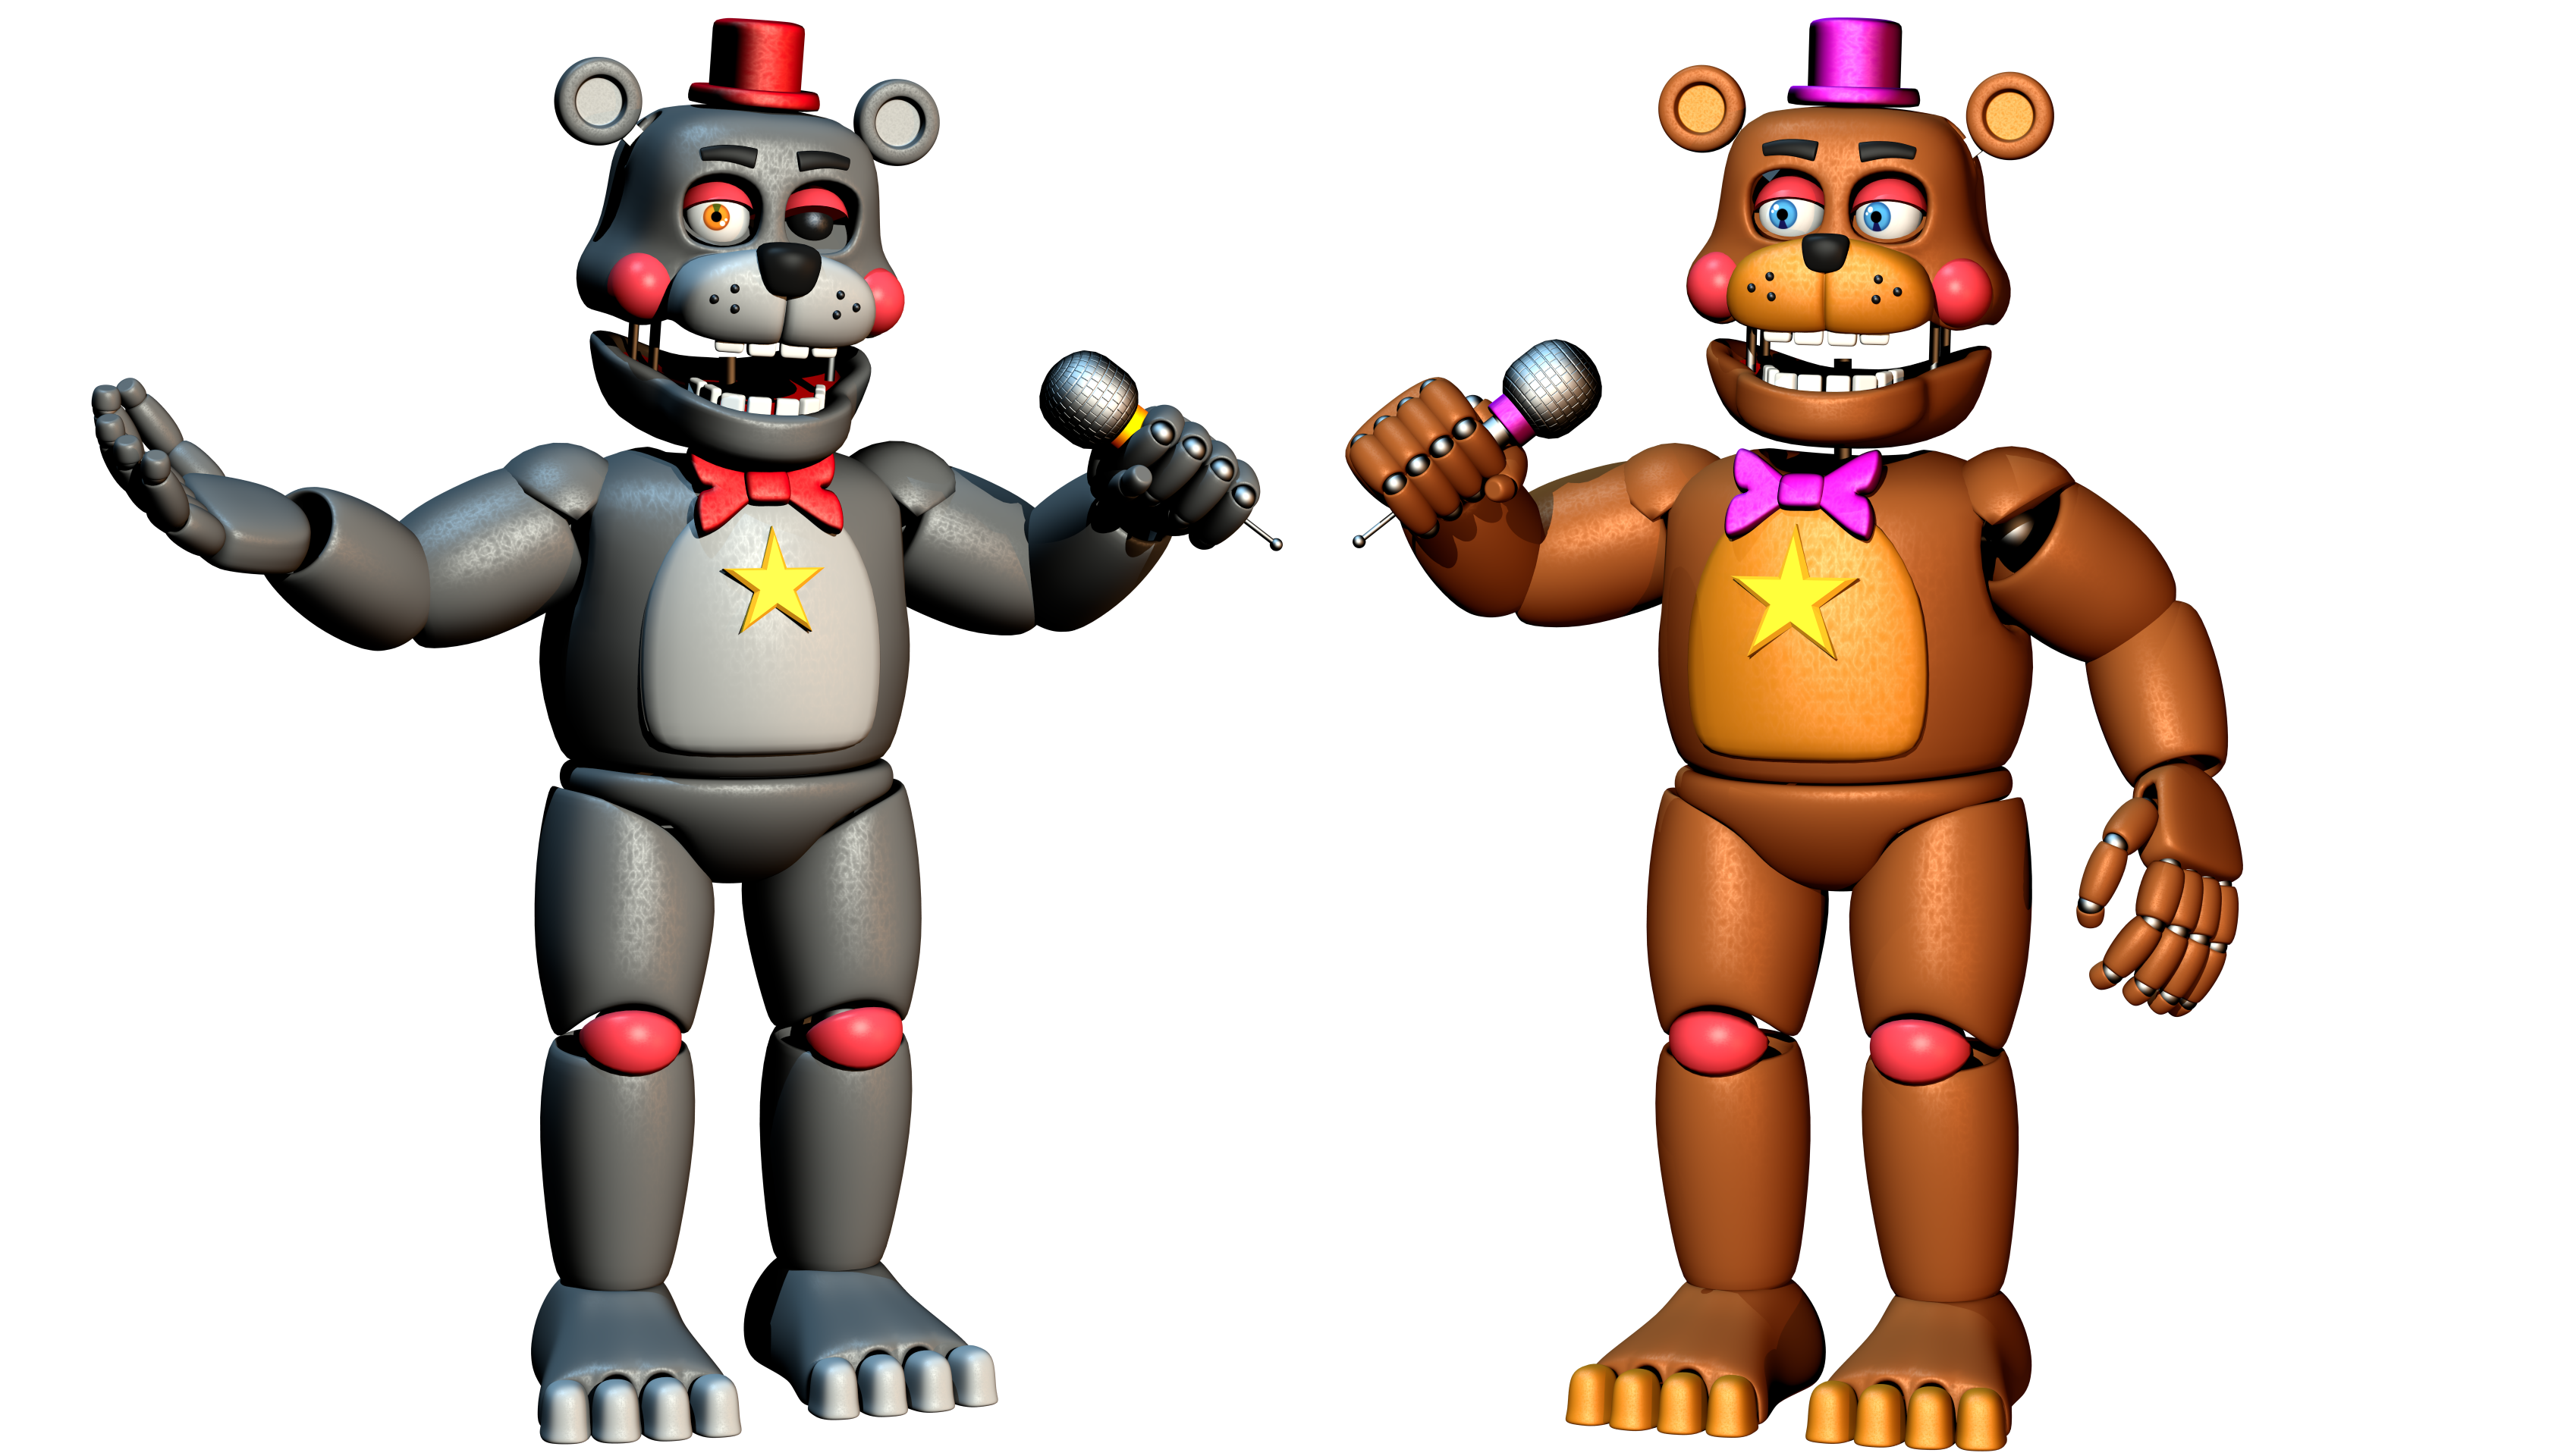 Lefty and freddy by Bantranic on DeviantArt